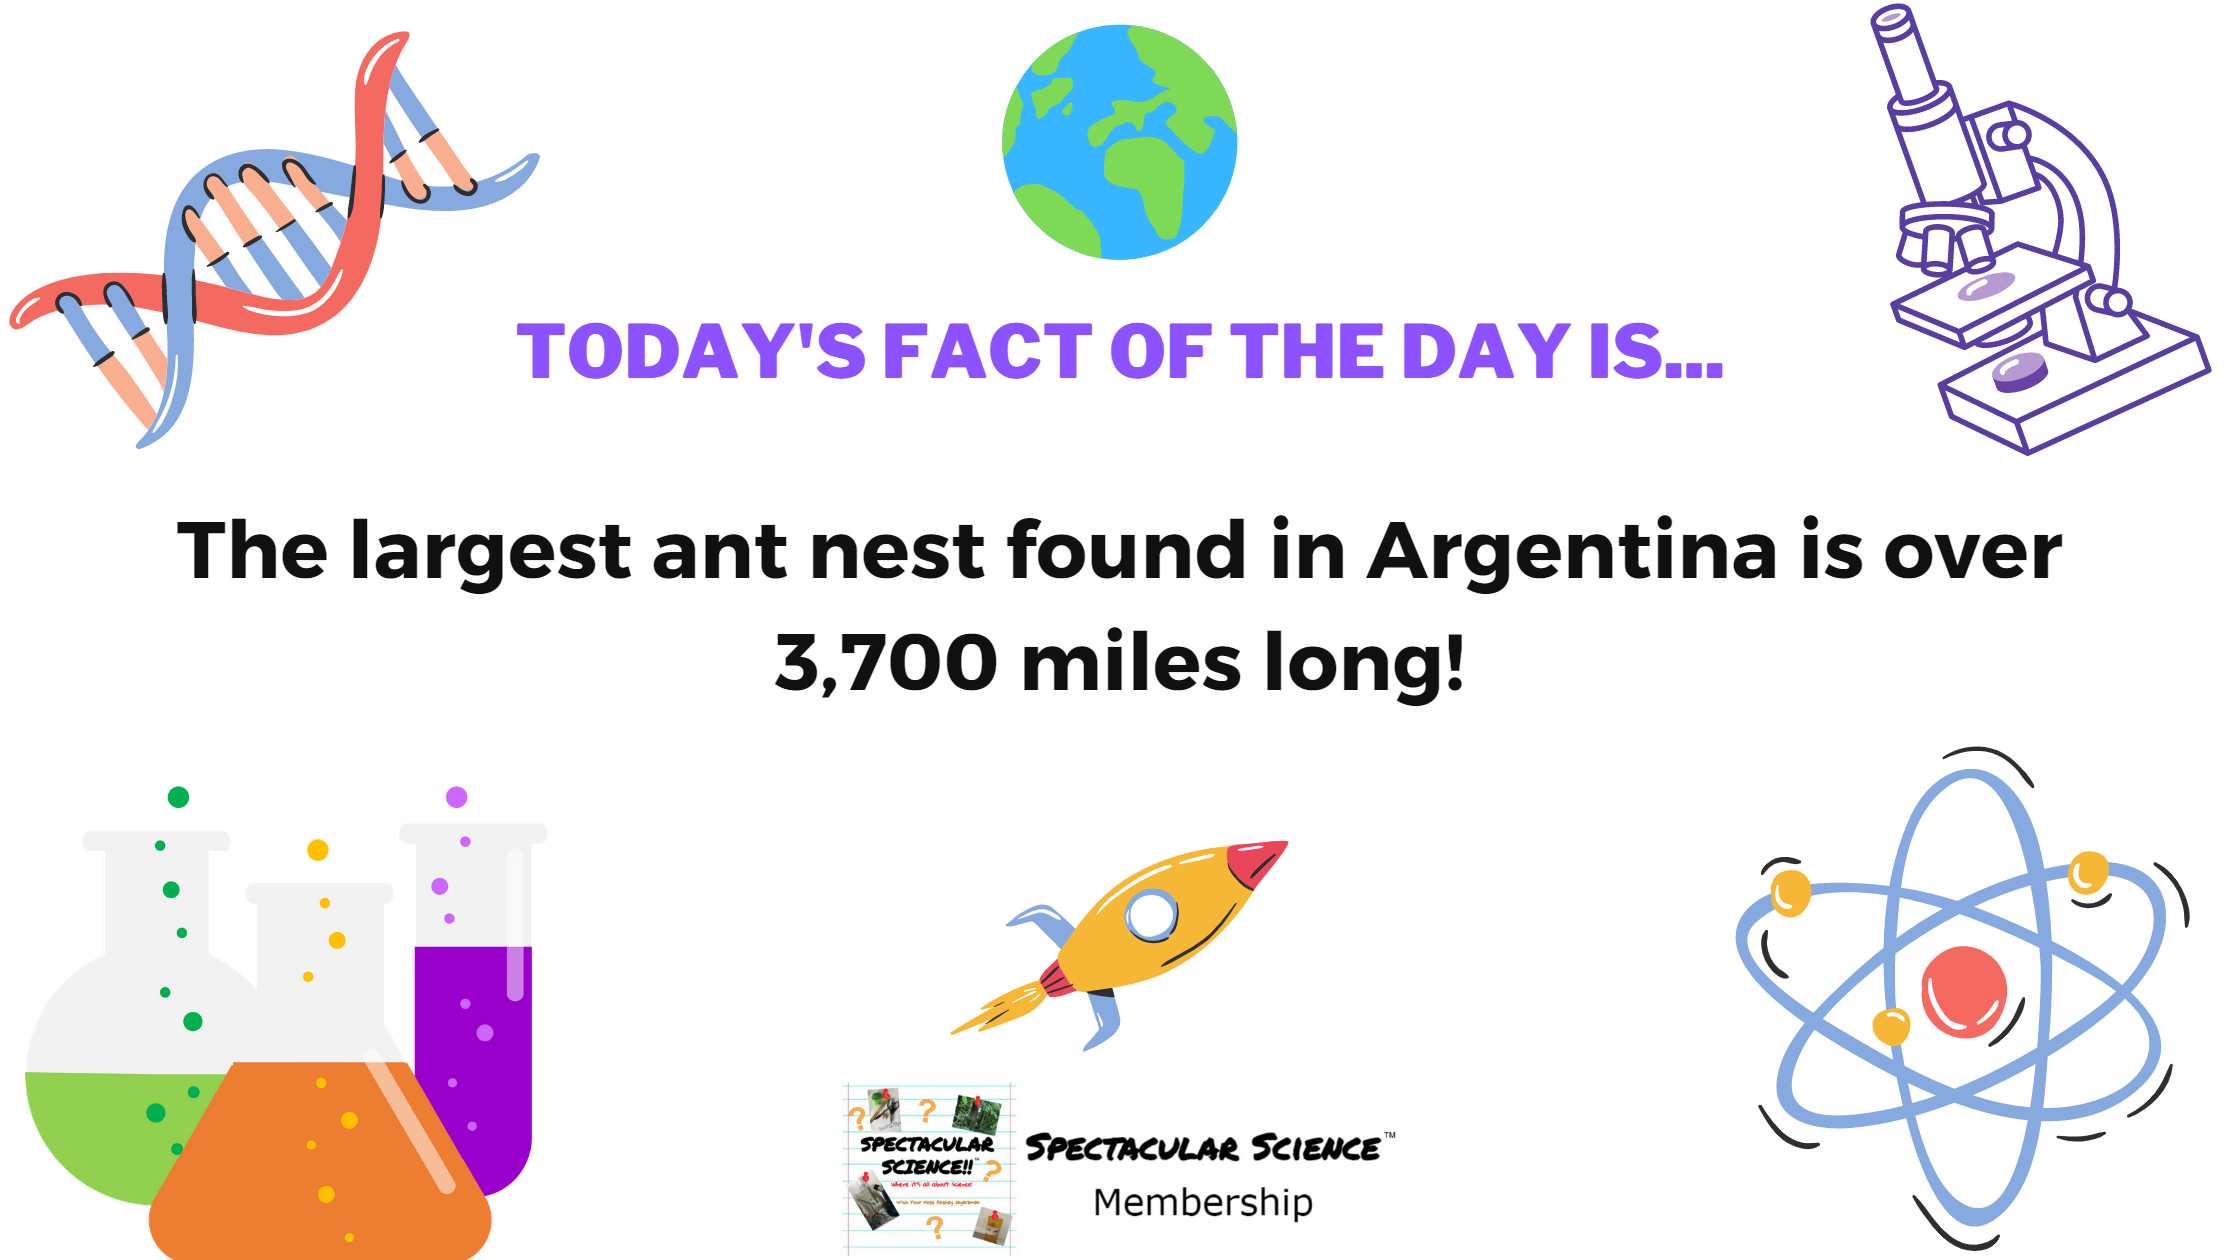 Fact of the Day Image December 14th